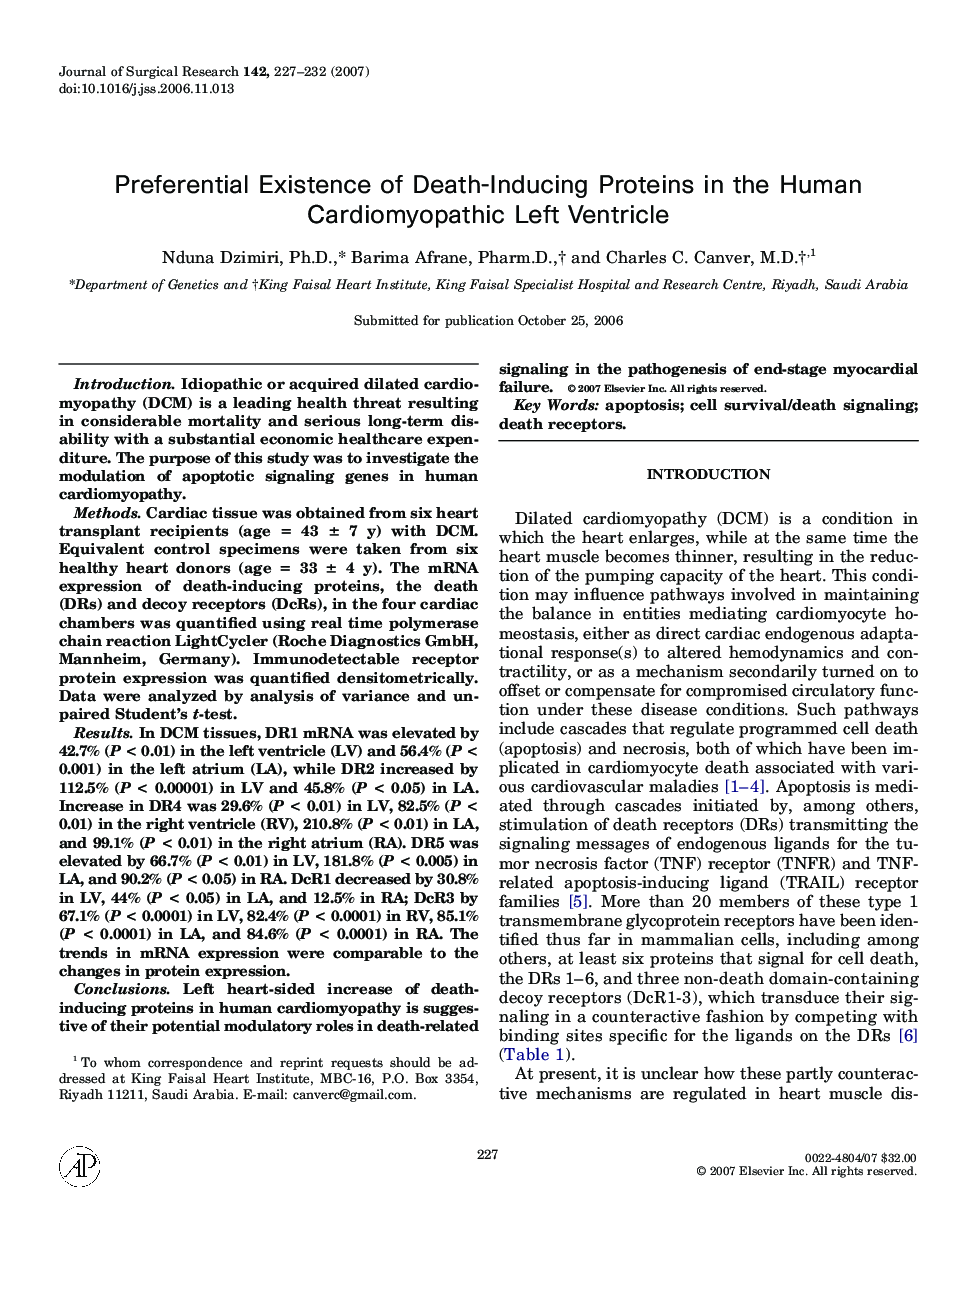 Preferential Existence of Death-Inducing Proteins in the Human Cardiomyopathic Left Ventricle